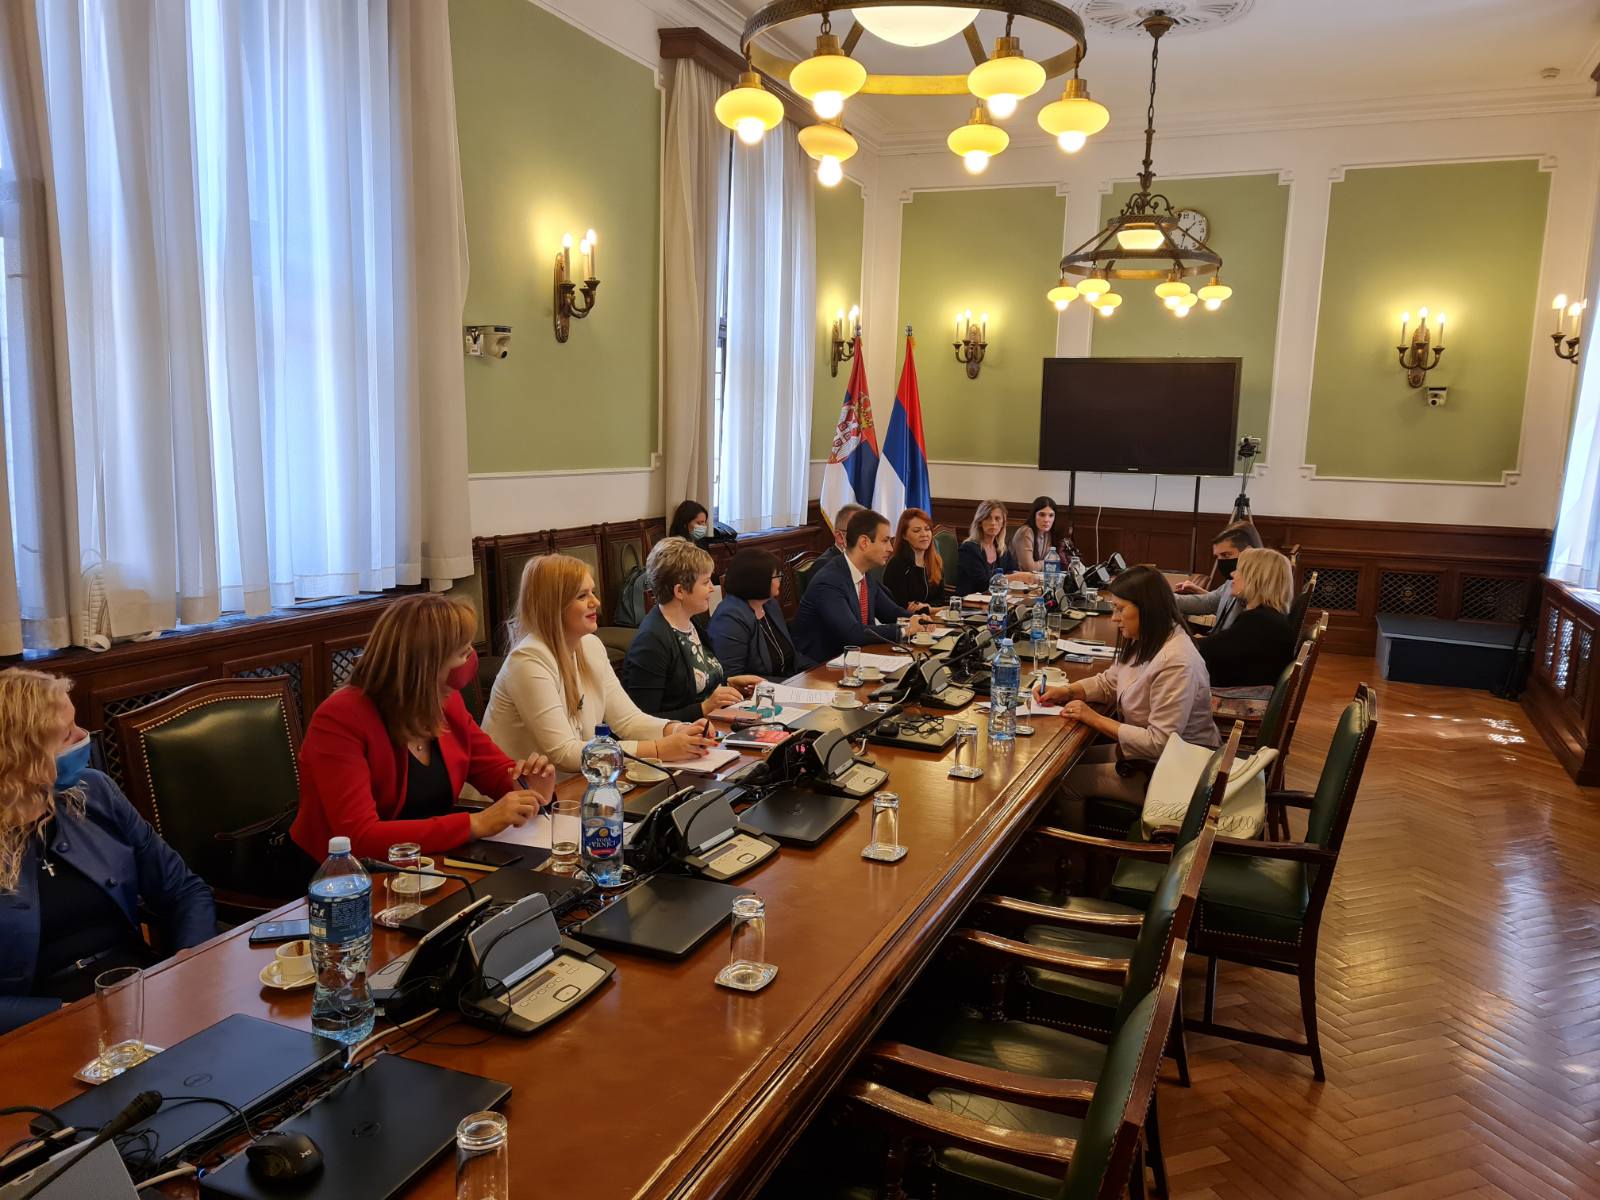 Serbia ready to open taxation chapter